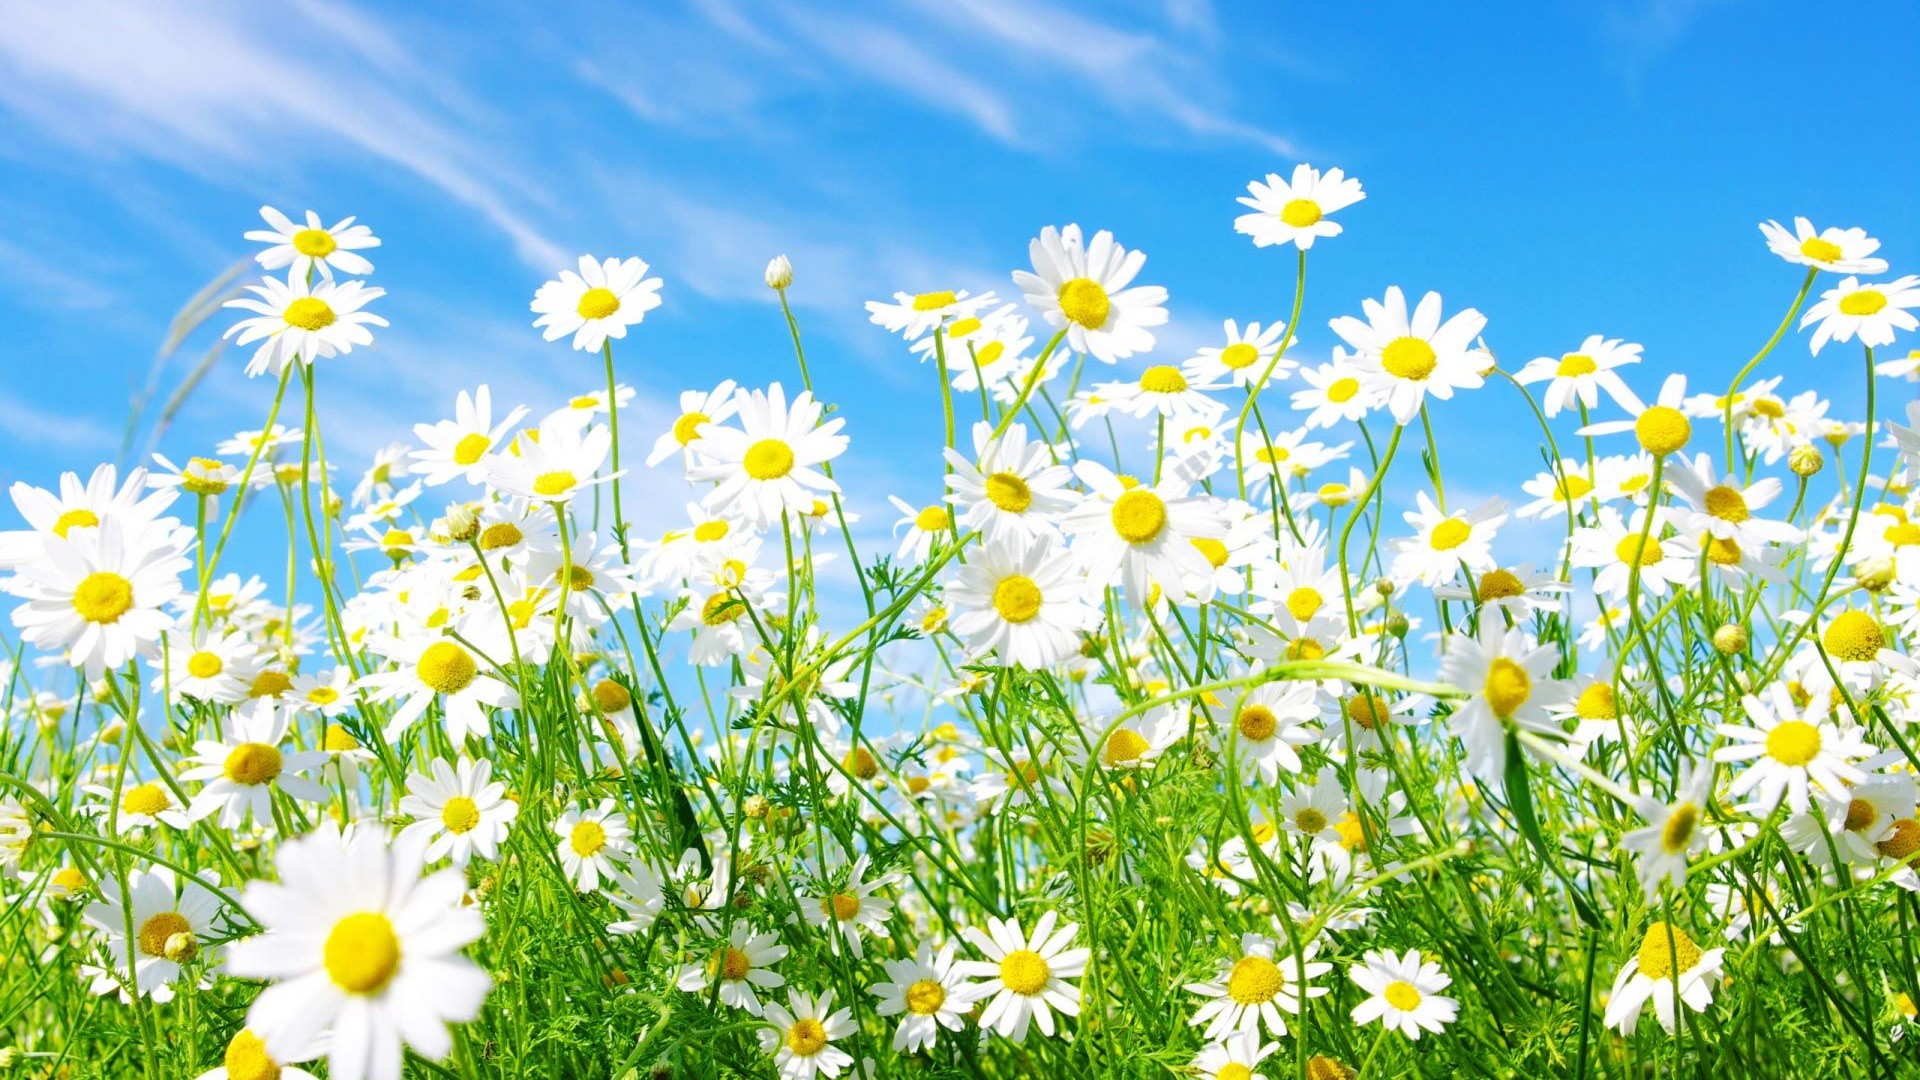 HD Spring Flowers Backgrounds 1920x1080